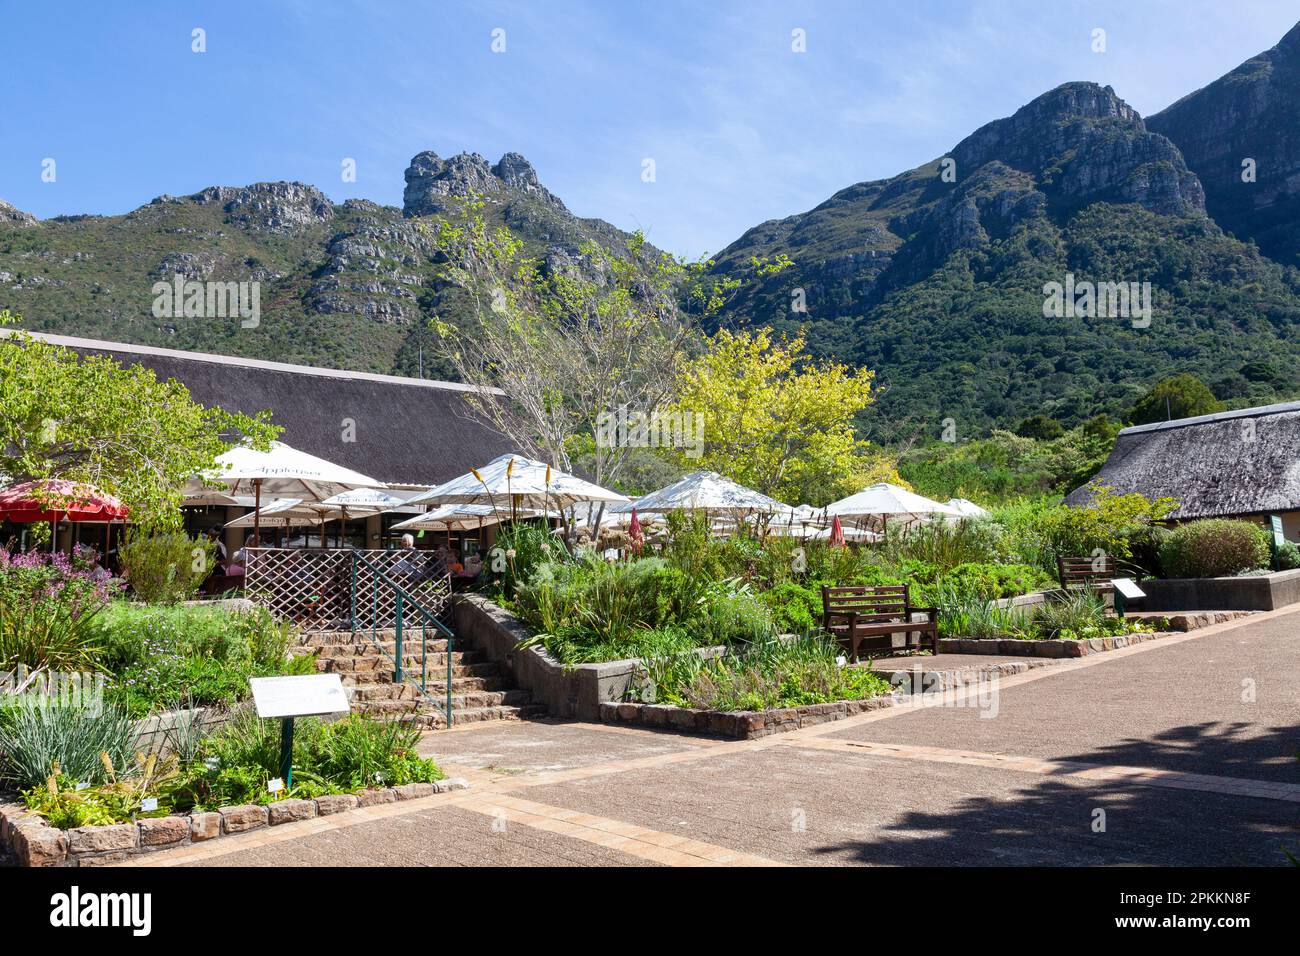 Restaurant at Kirstenbosch Botanical Garden, Cape Town, Western Cape, South Africa with a view to Table Mountain and Castle Rock with tourists eating Stock Photo